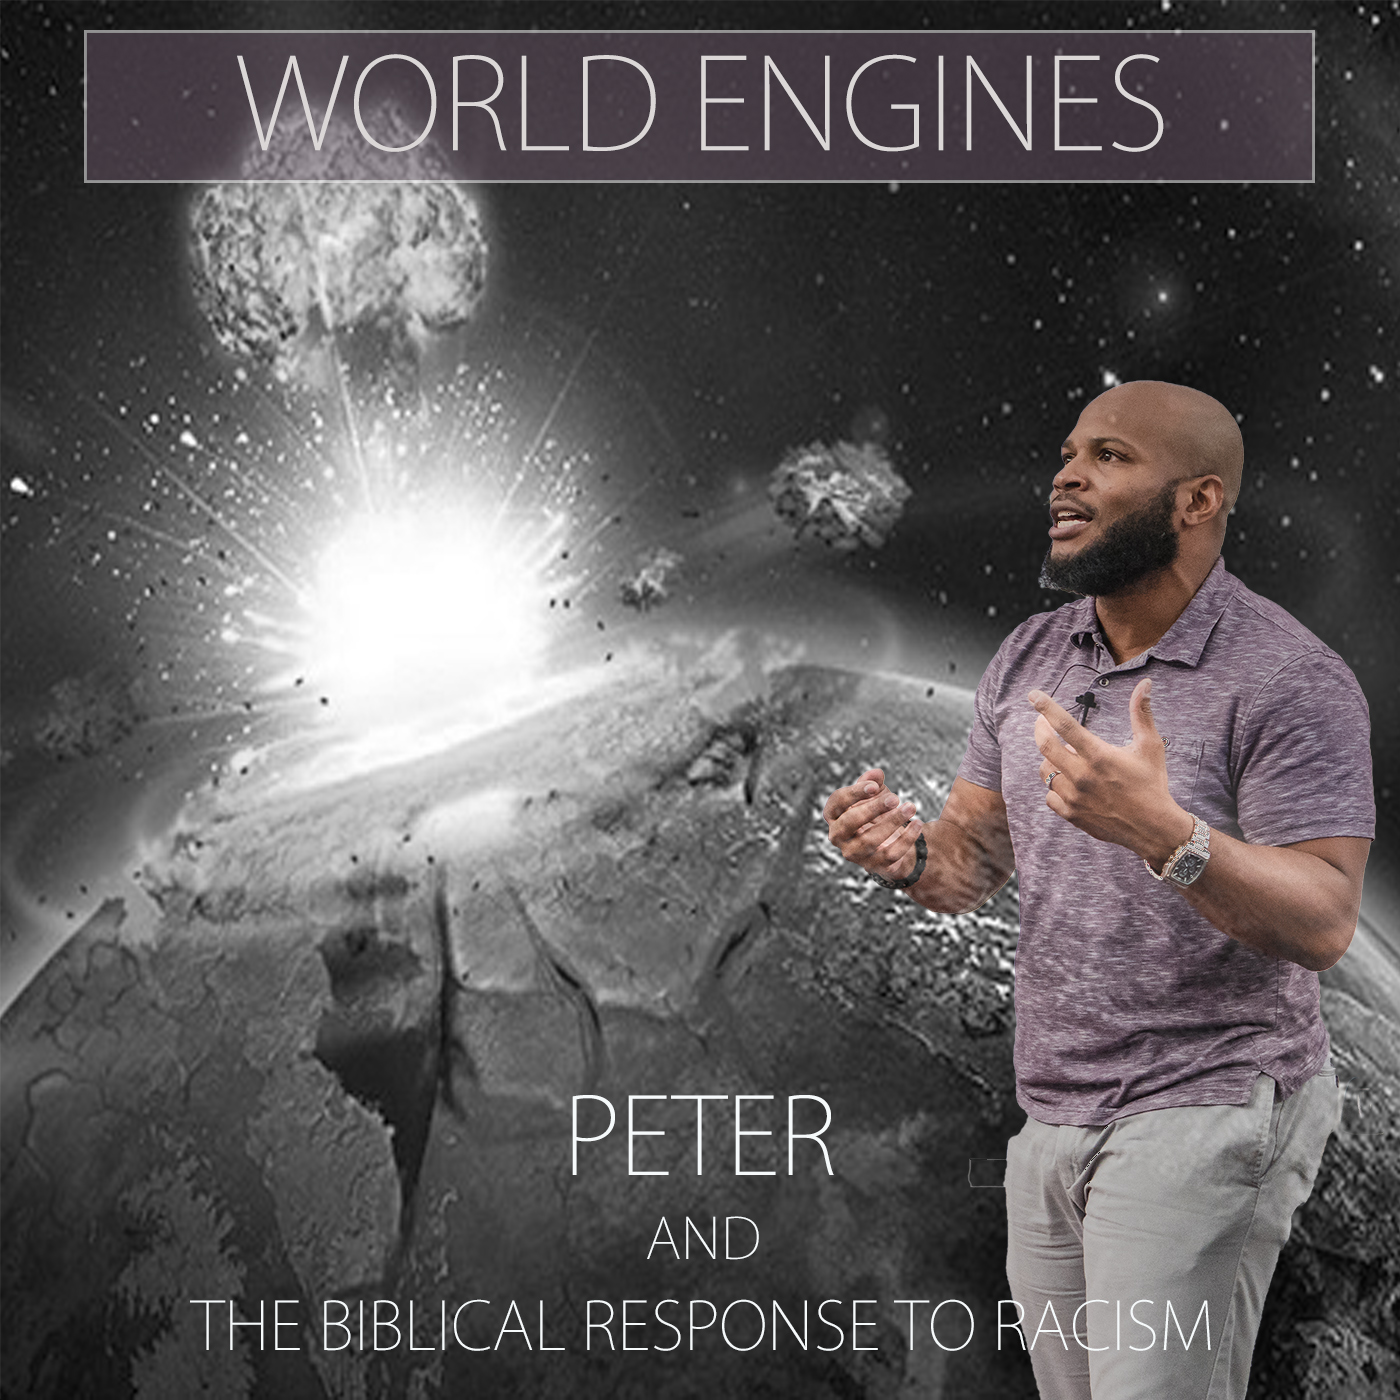 The World Engines - Peter and the biblical response to racism.